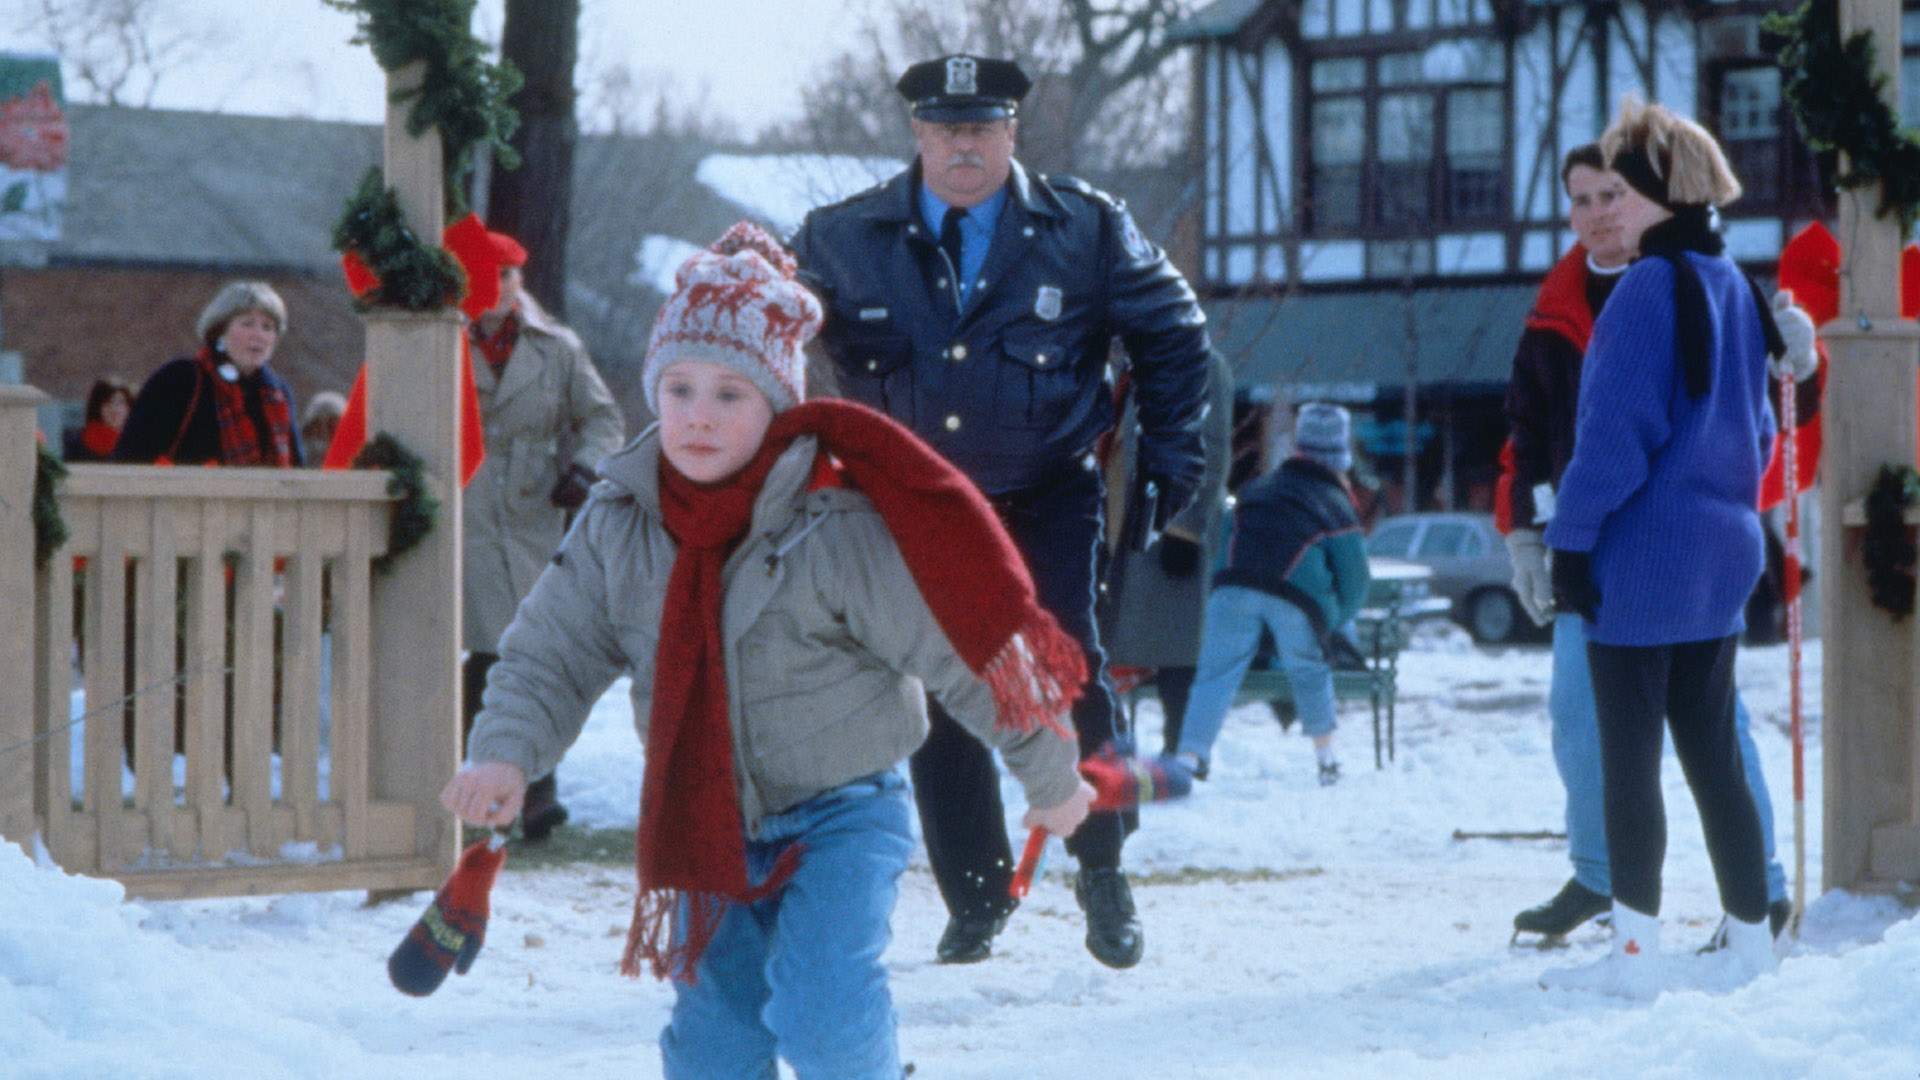 Start Thinking About Christmas: MSO Is Bringing 'Home Alone' Back to the Big Screen Again with a Live Soundtrack